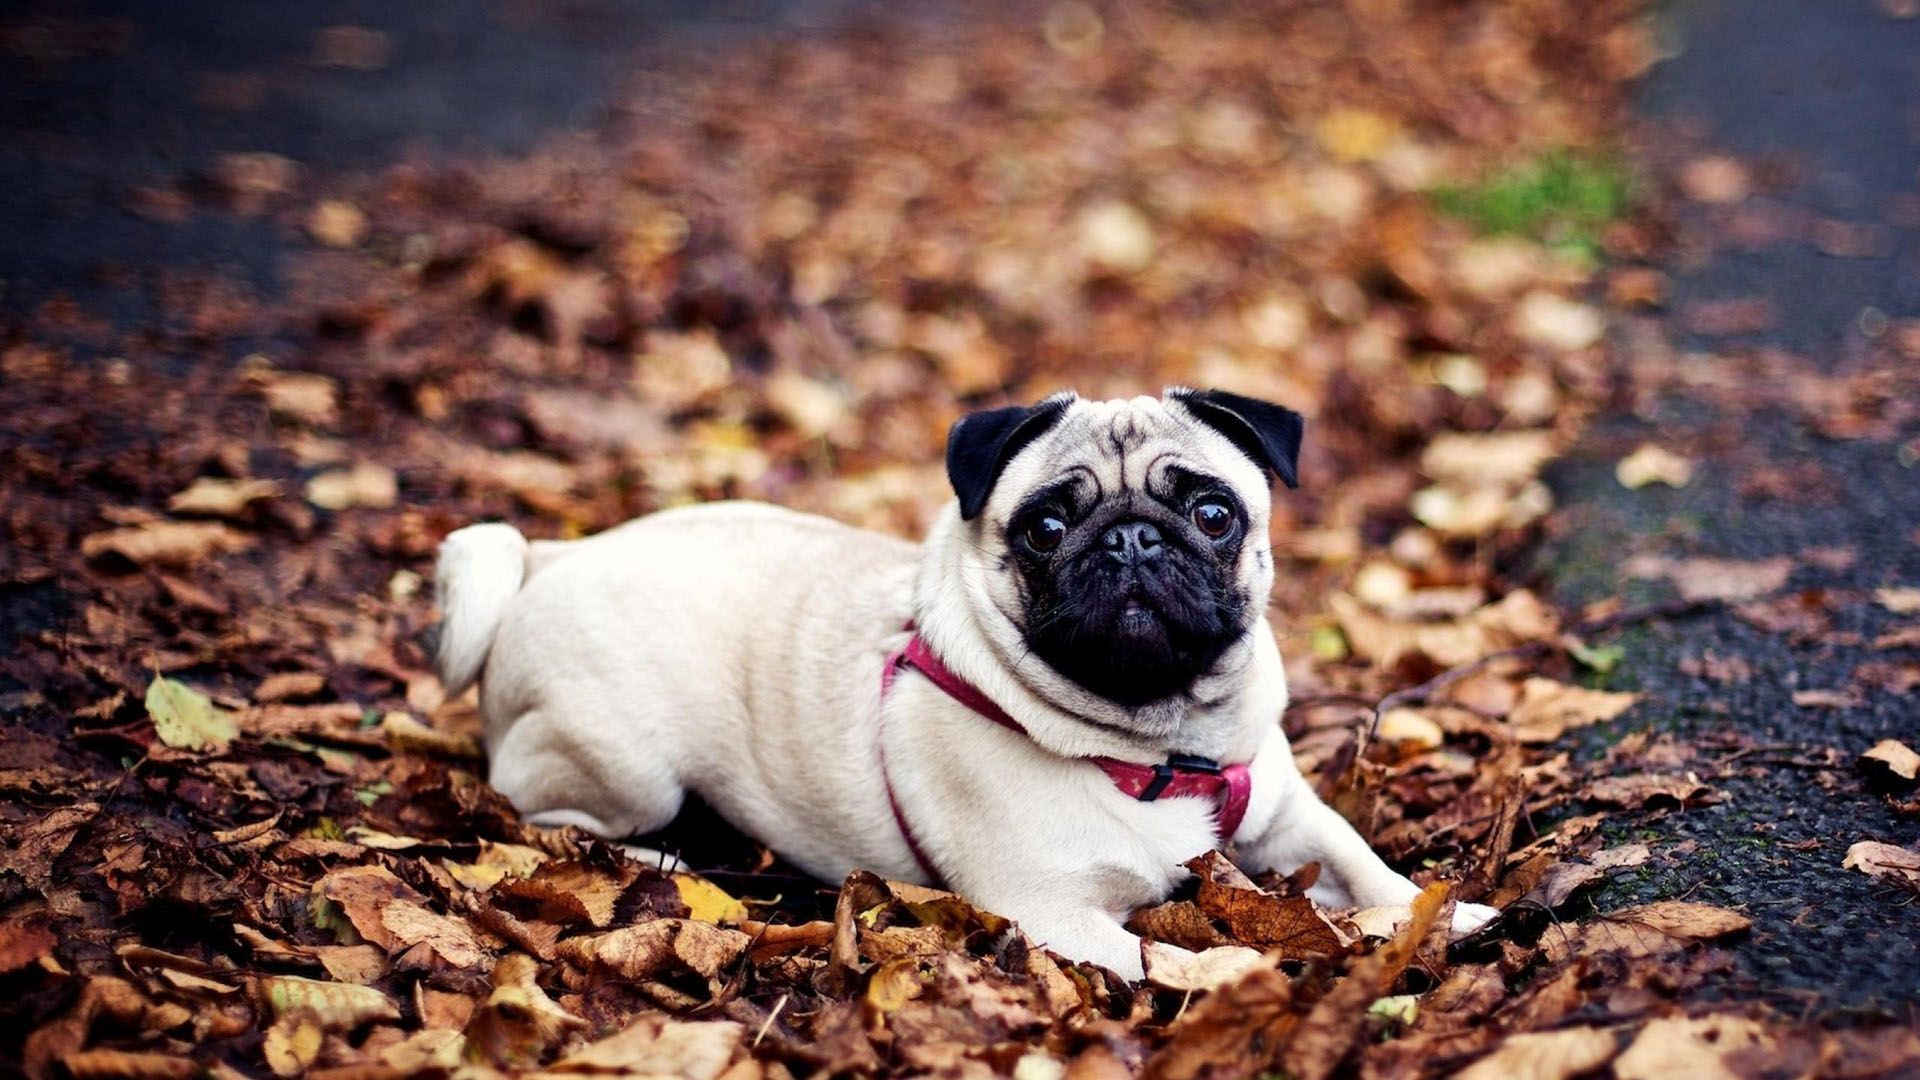 Pug Dog HD Wallpapers | Pug Dog Pictures Free | Cool Wallpapers